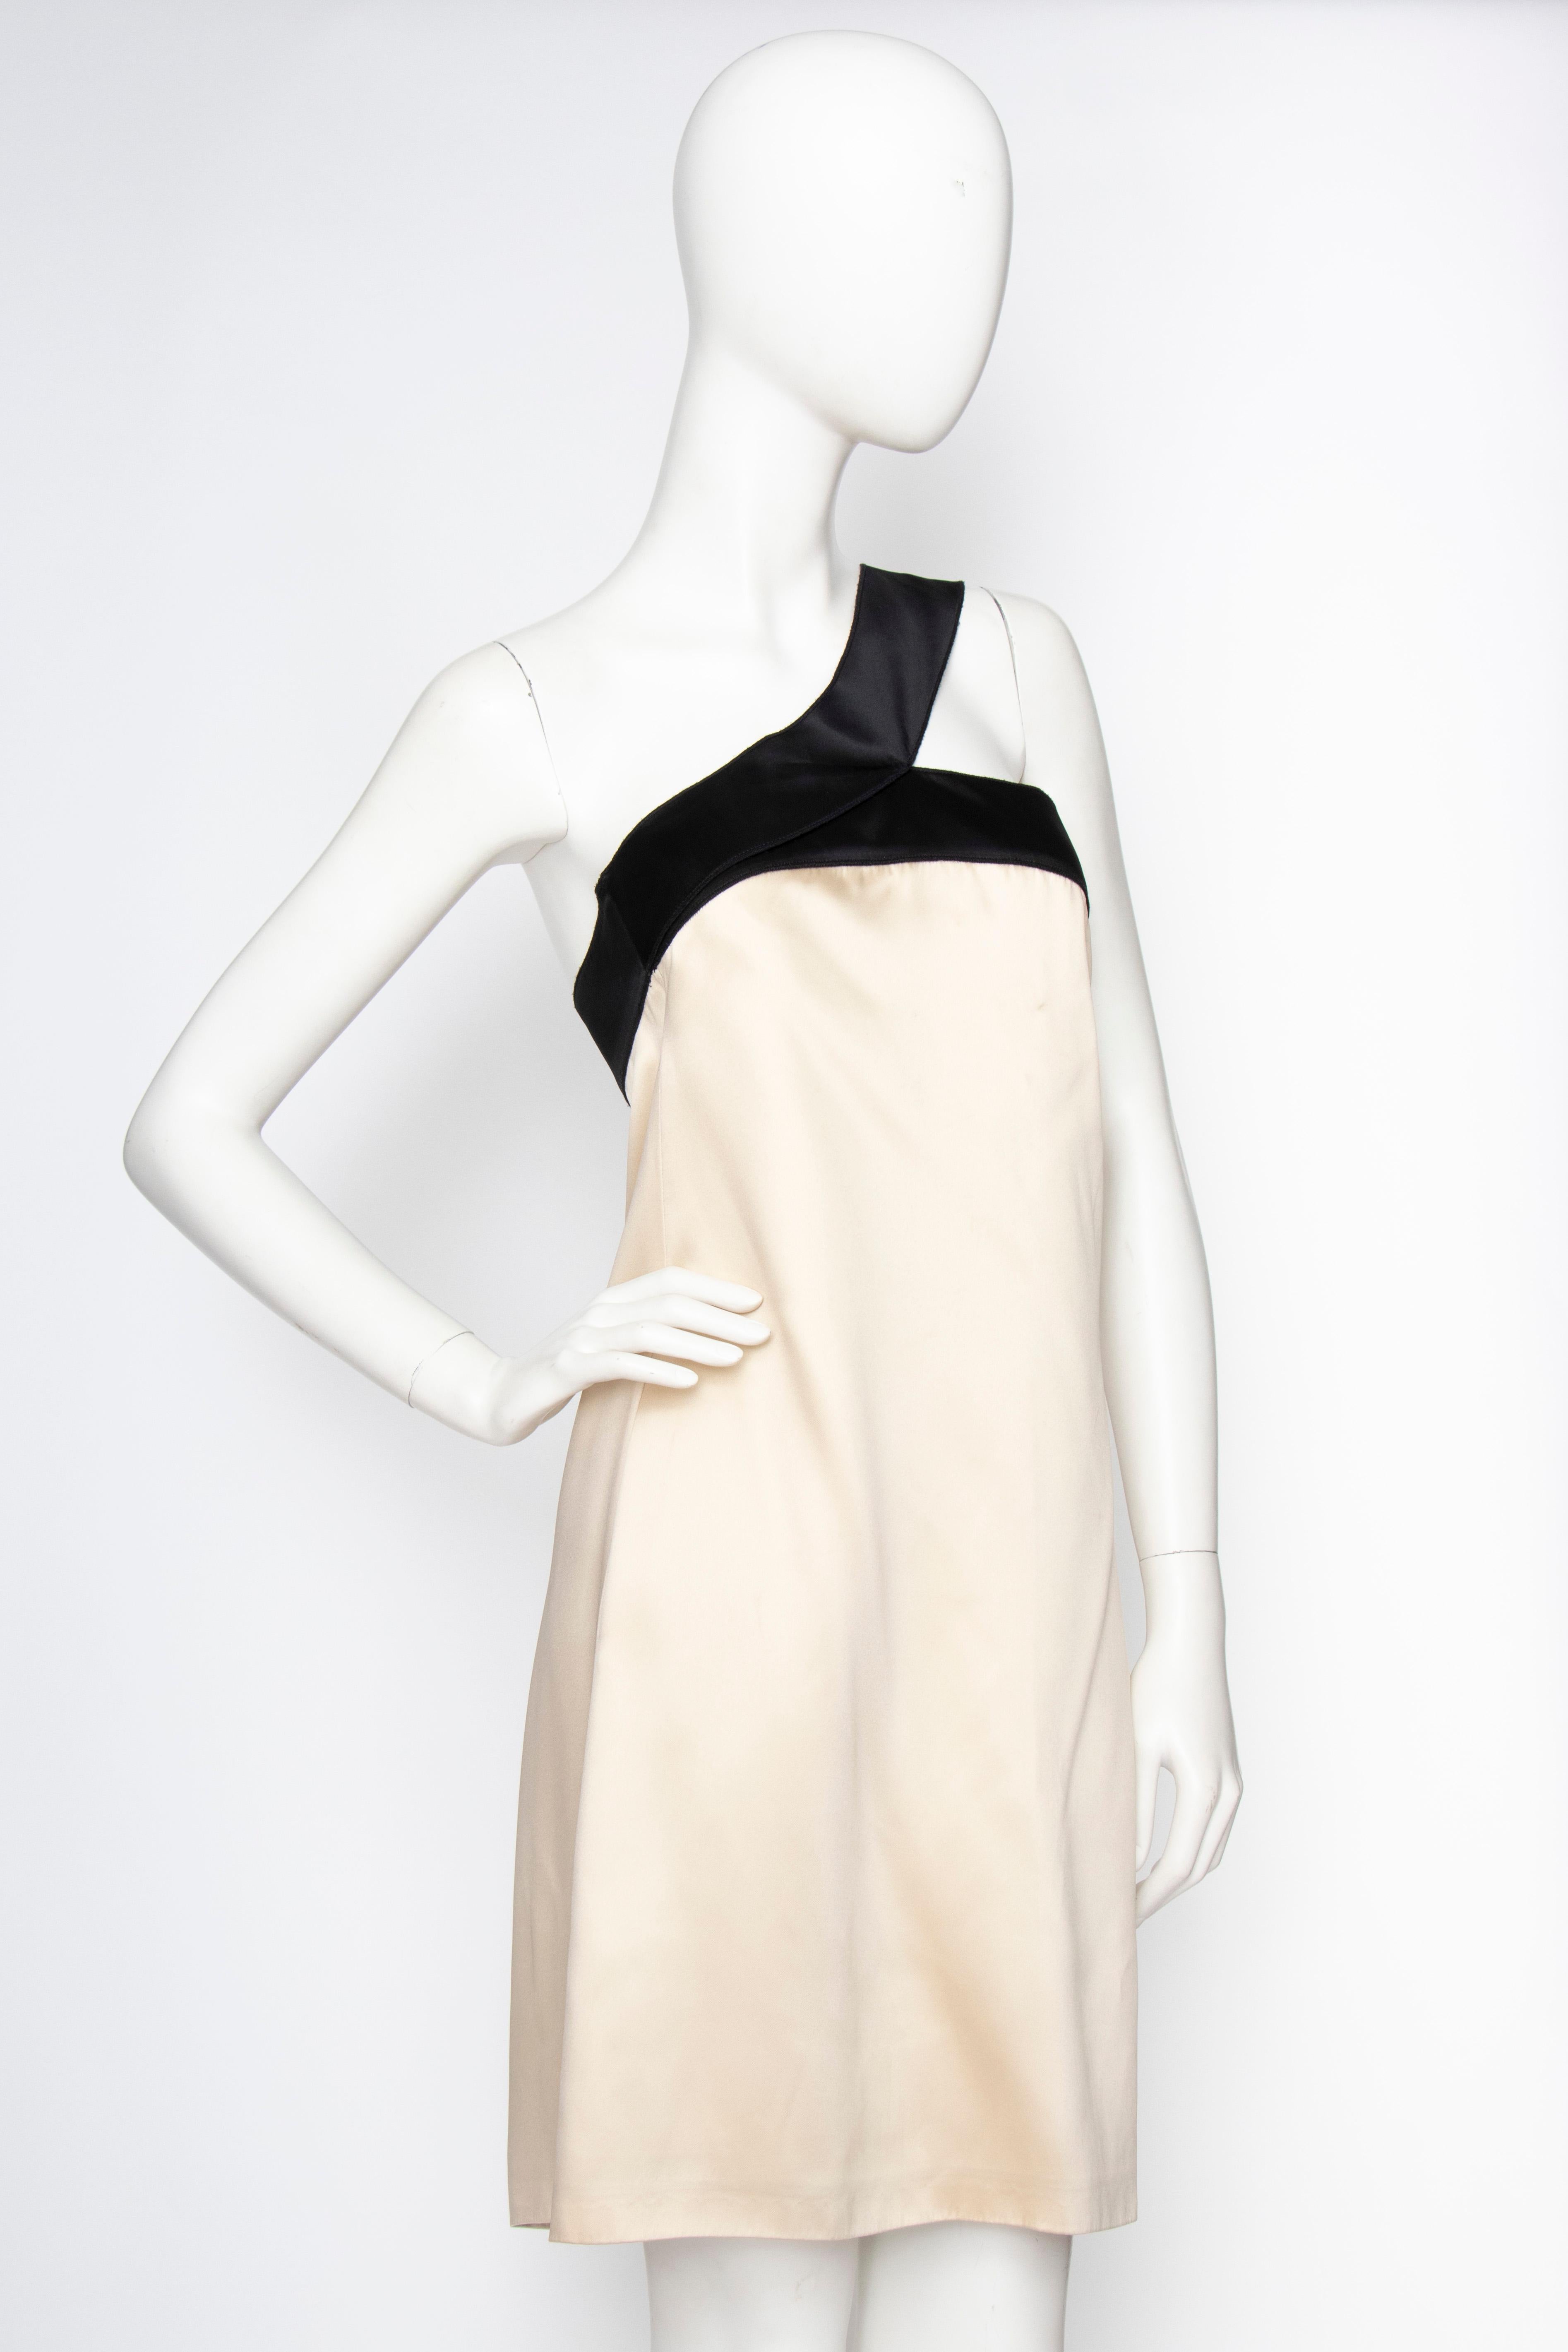 An early 2000s D&G by Dolce & Gabbana ivory satin column cocktail dress with contrasting black trim and asymmetrical shoulder strap. The dress is lined in silk and has invisible side pockets. 

The size of the dress corresponds to a modern size